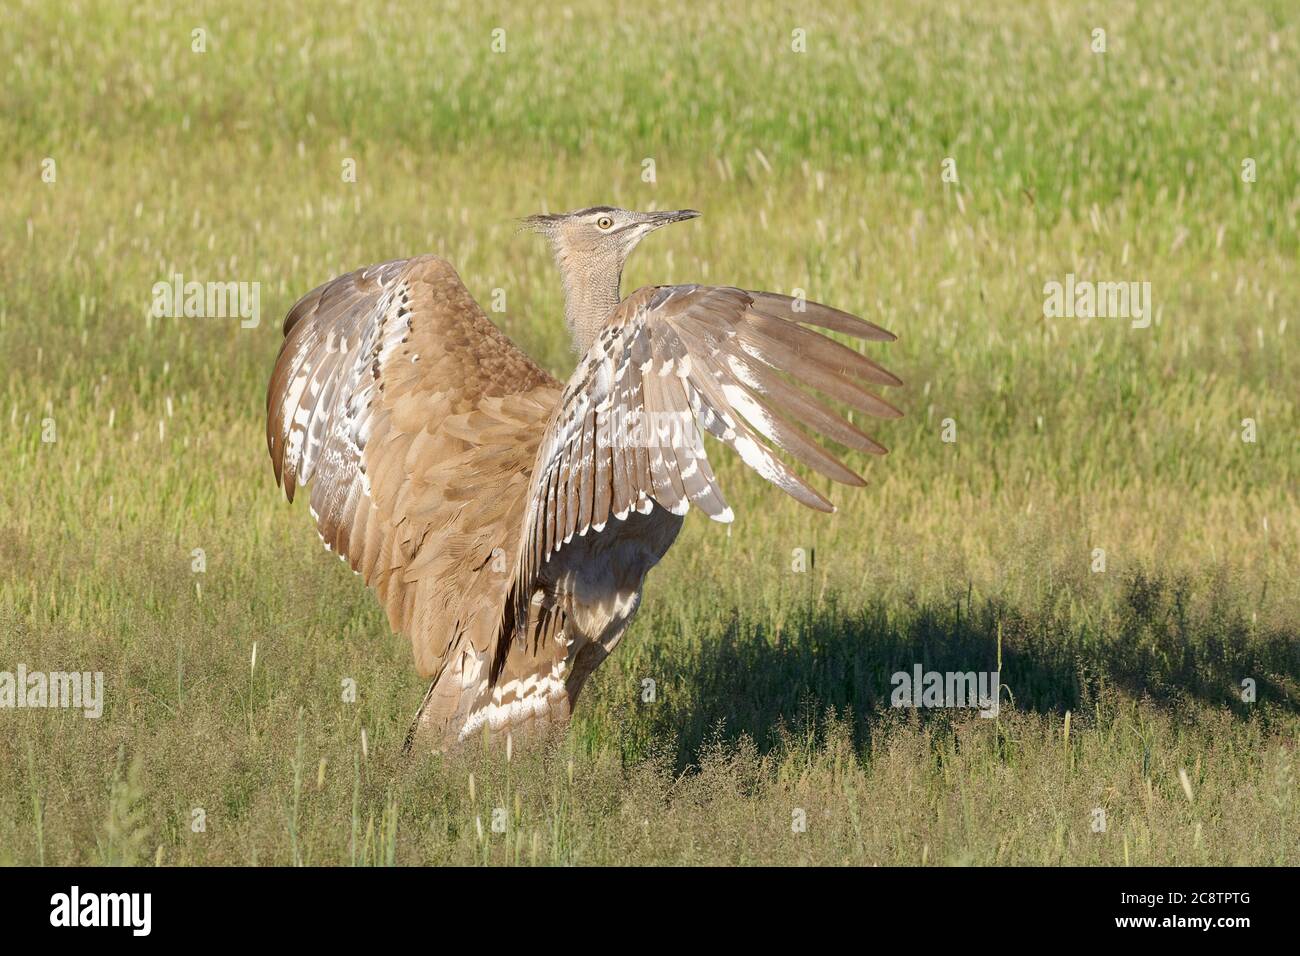 Kori bustard (Ardeotis kori), adult flapping its wings, in high grass, Kgalagadi Transfrontier Park, Northern Cape, South Africa, Africa Stock Photo